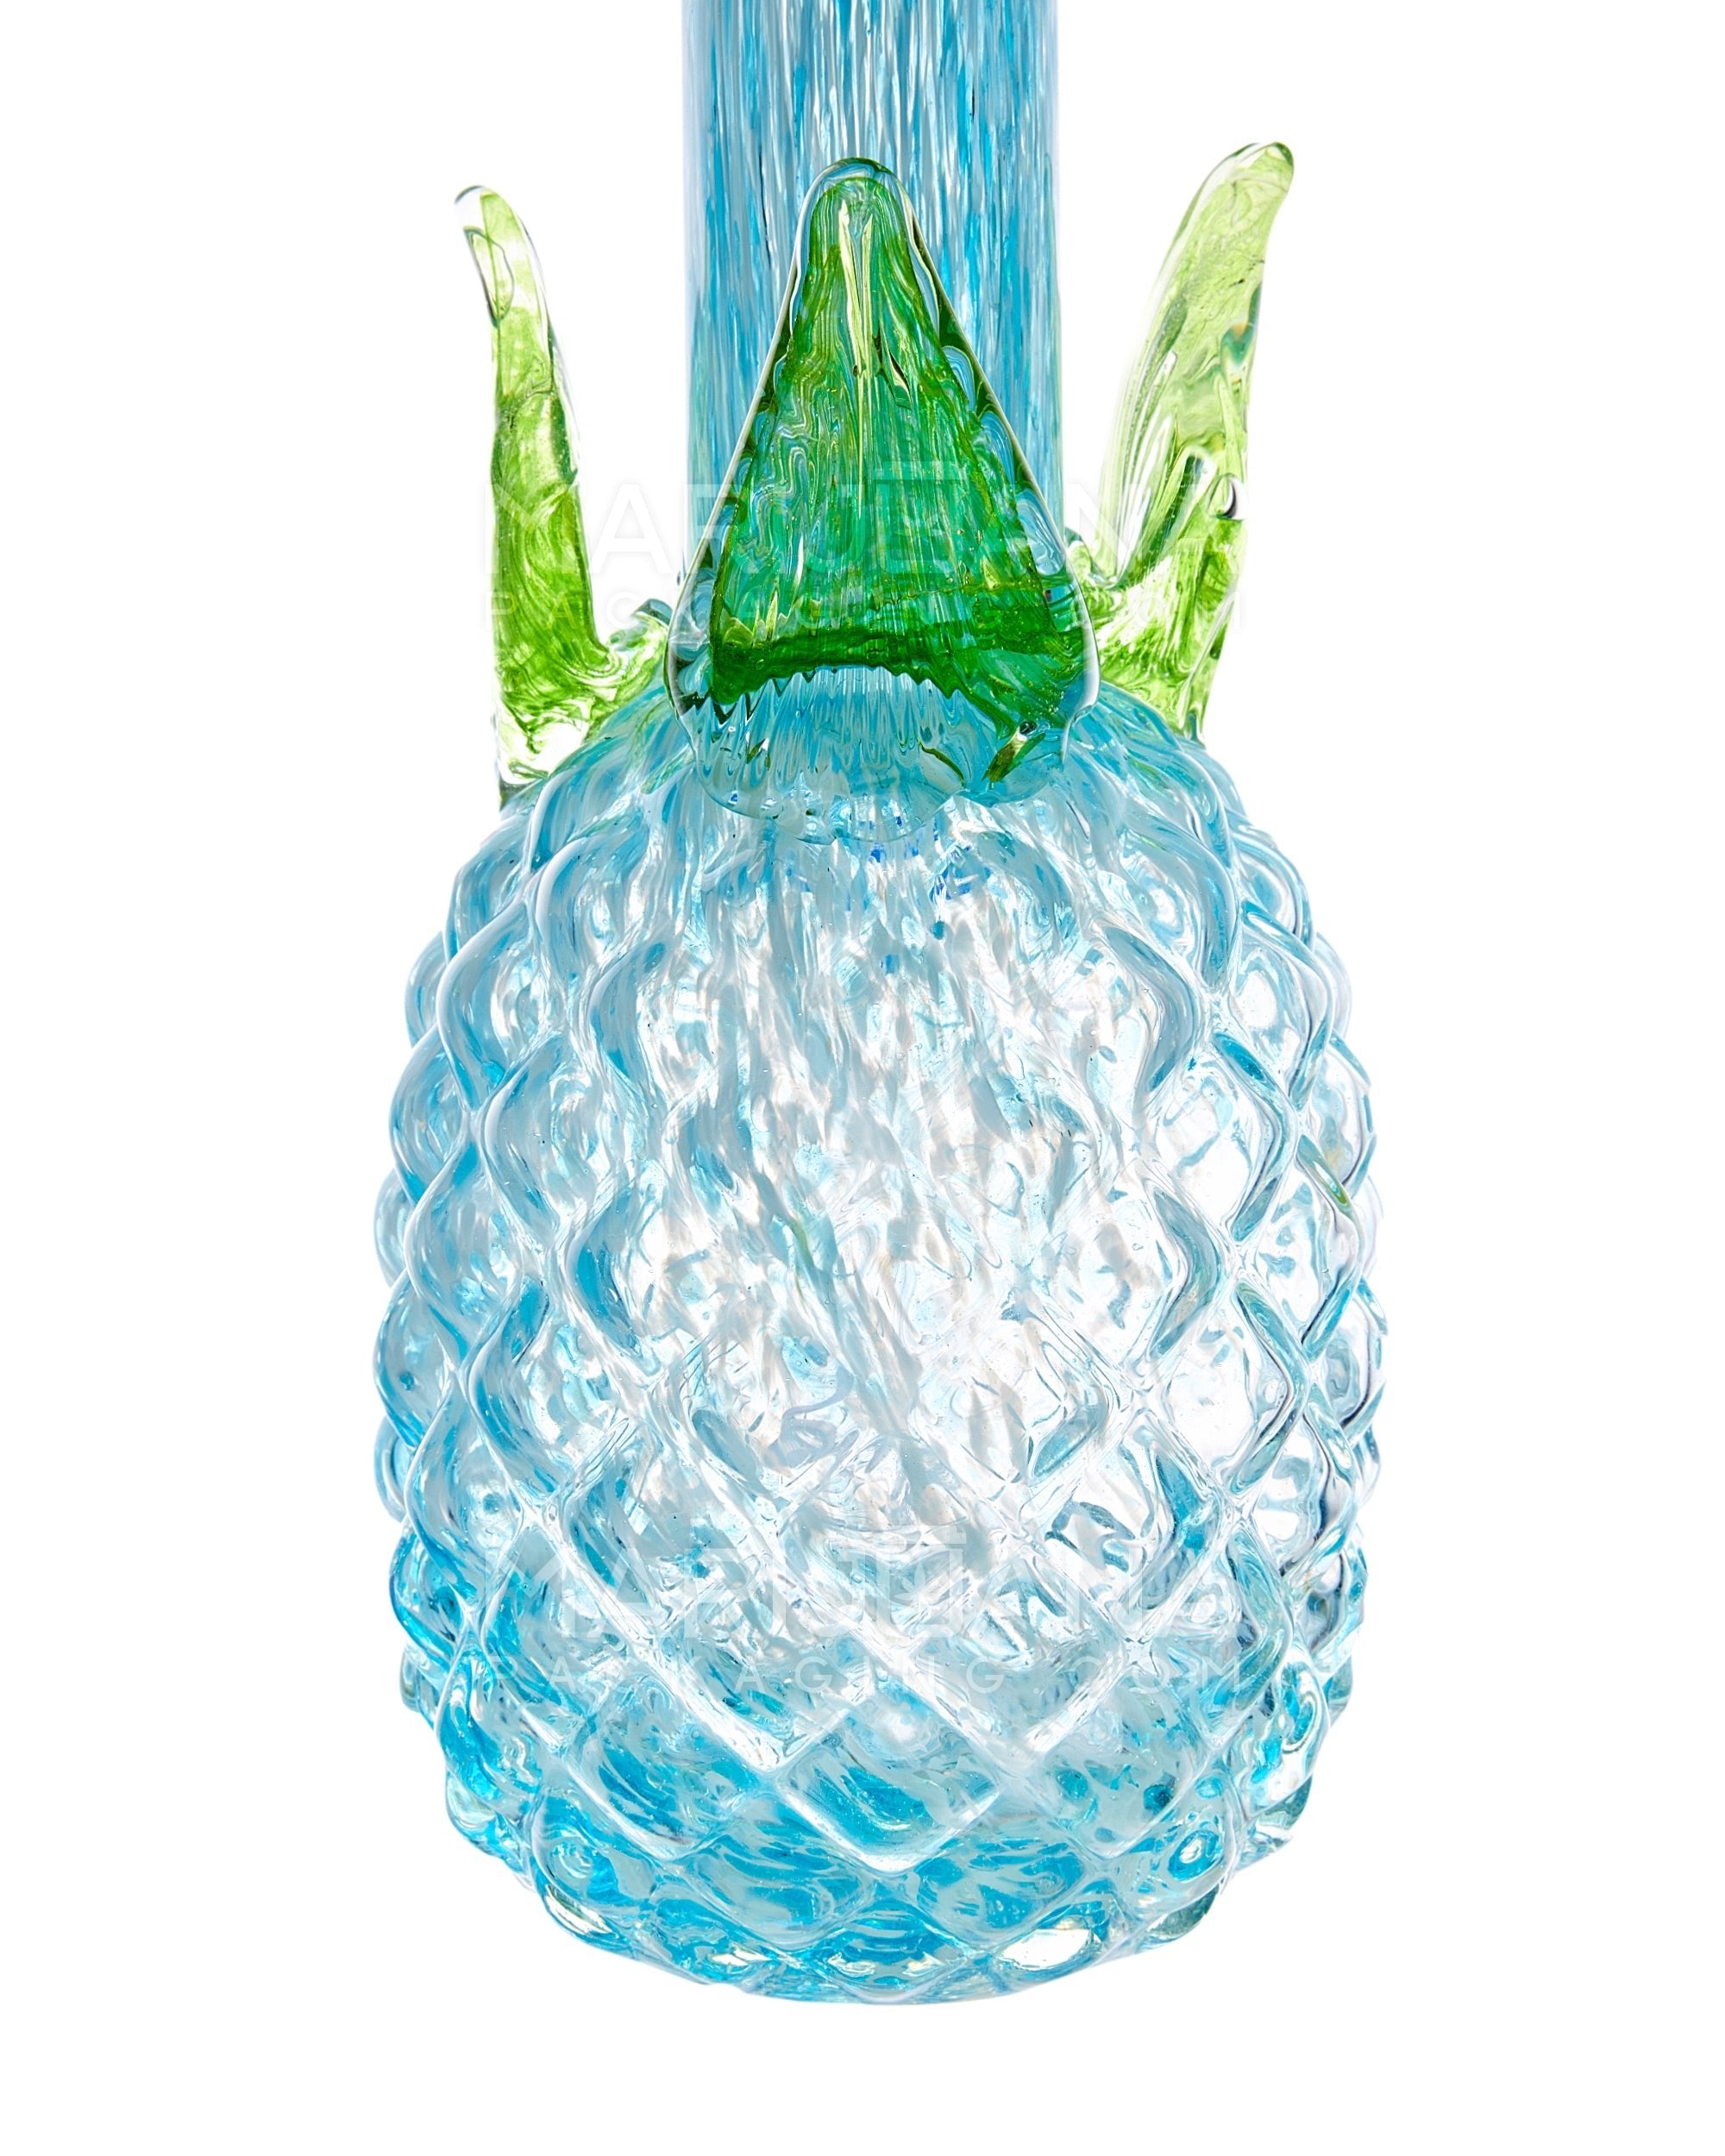 Straight Neck Color Pull Pineapple Glass Water Pipe | 12in Tall - 14mm Bowl - Blue - 3